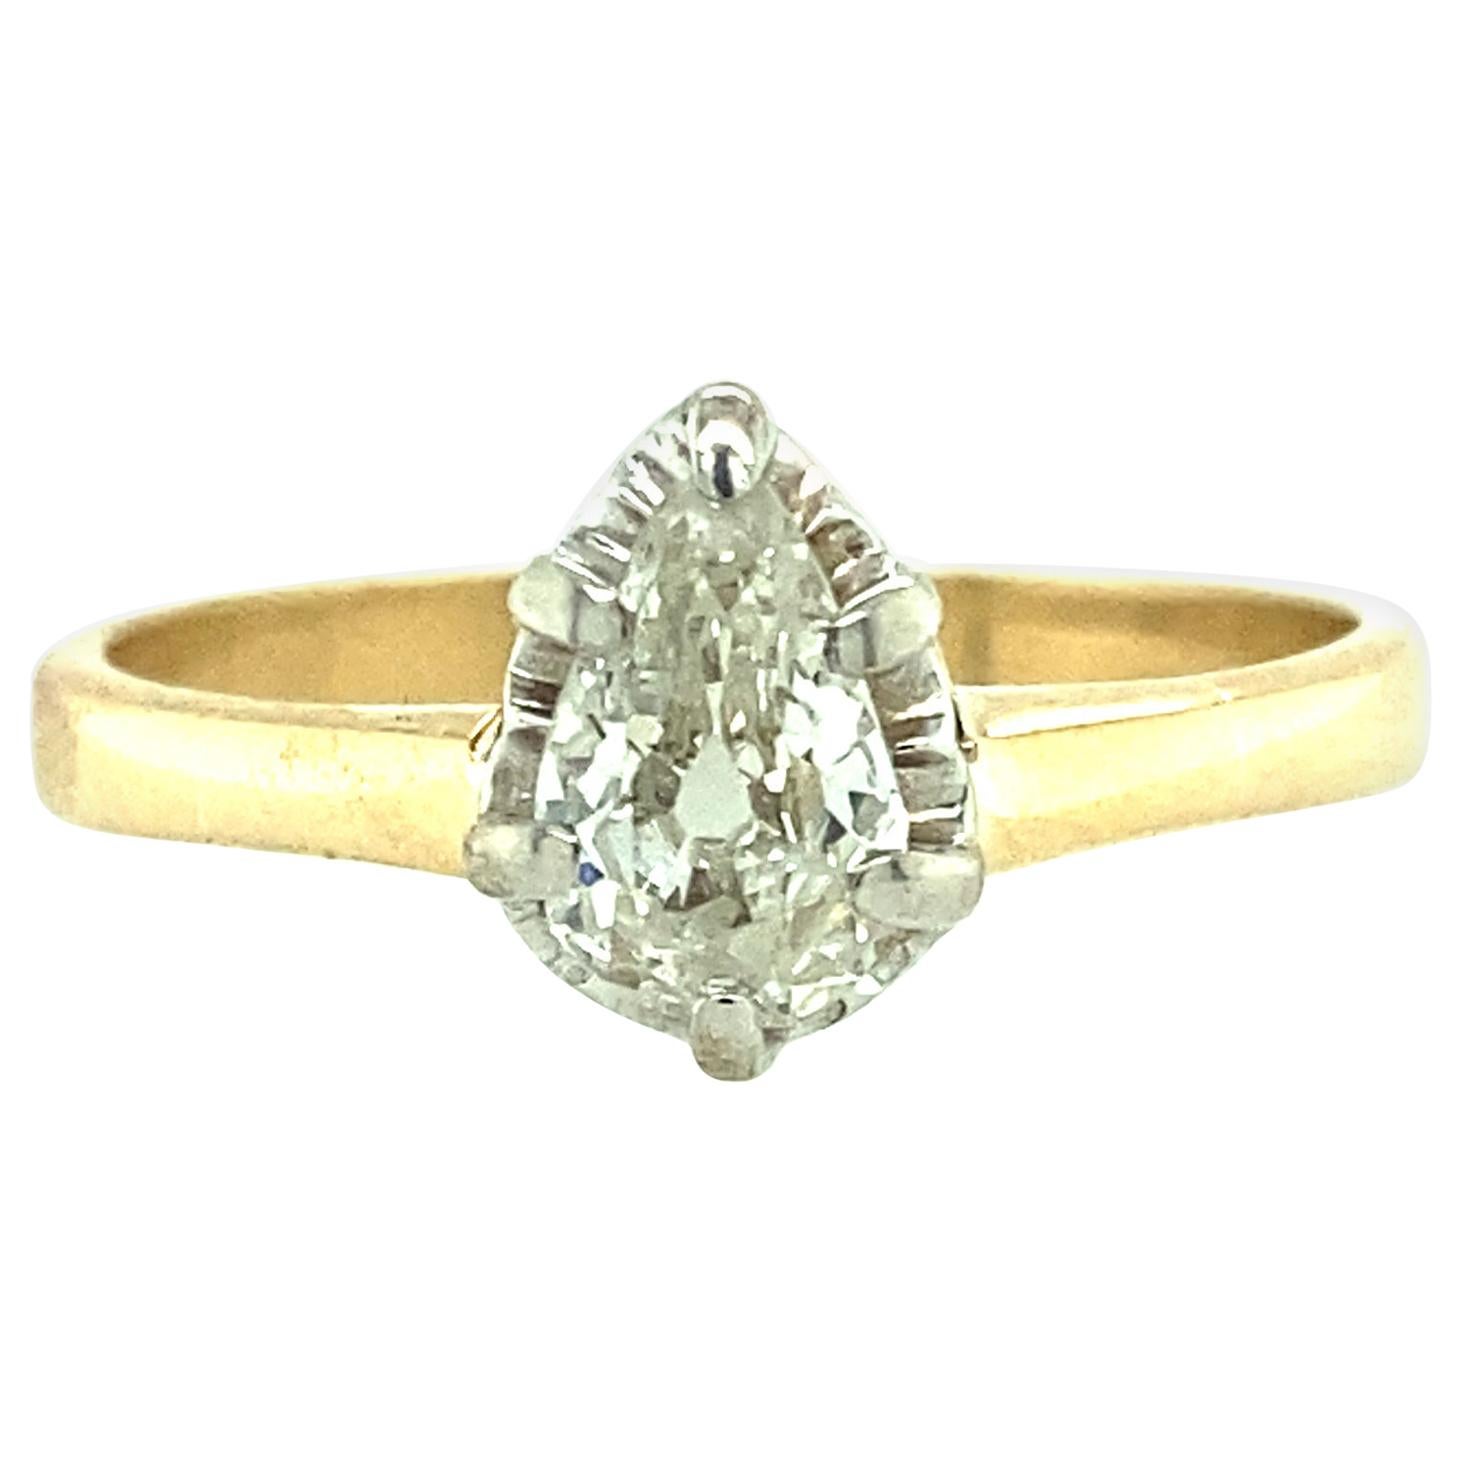 Antique Pear Shaped Diamond Engagement Ring